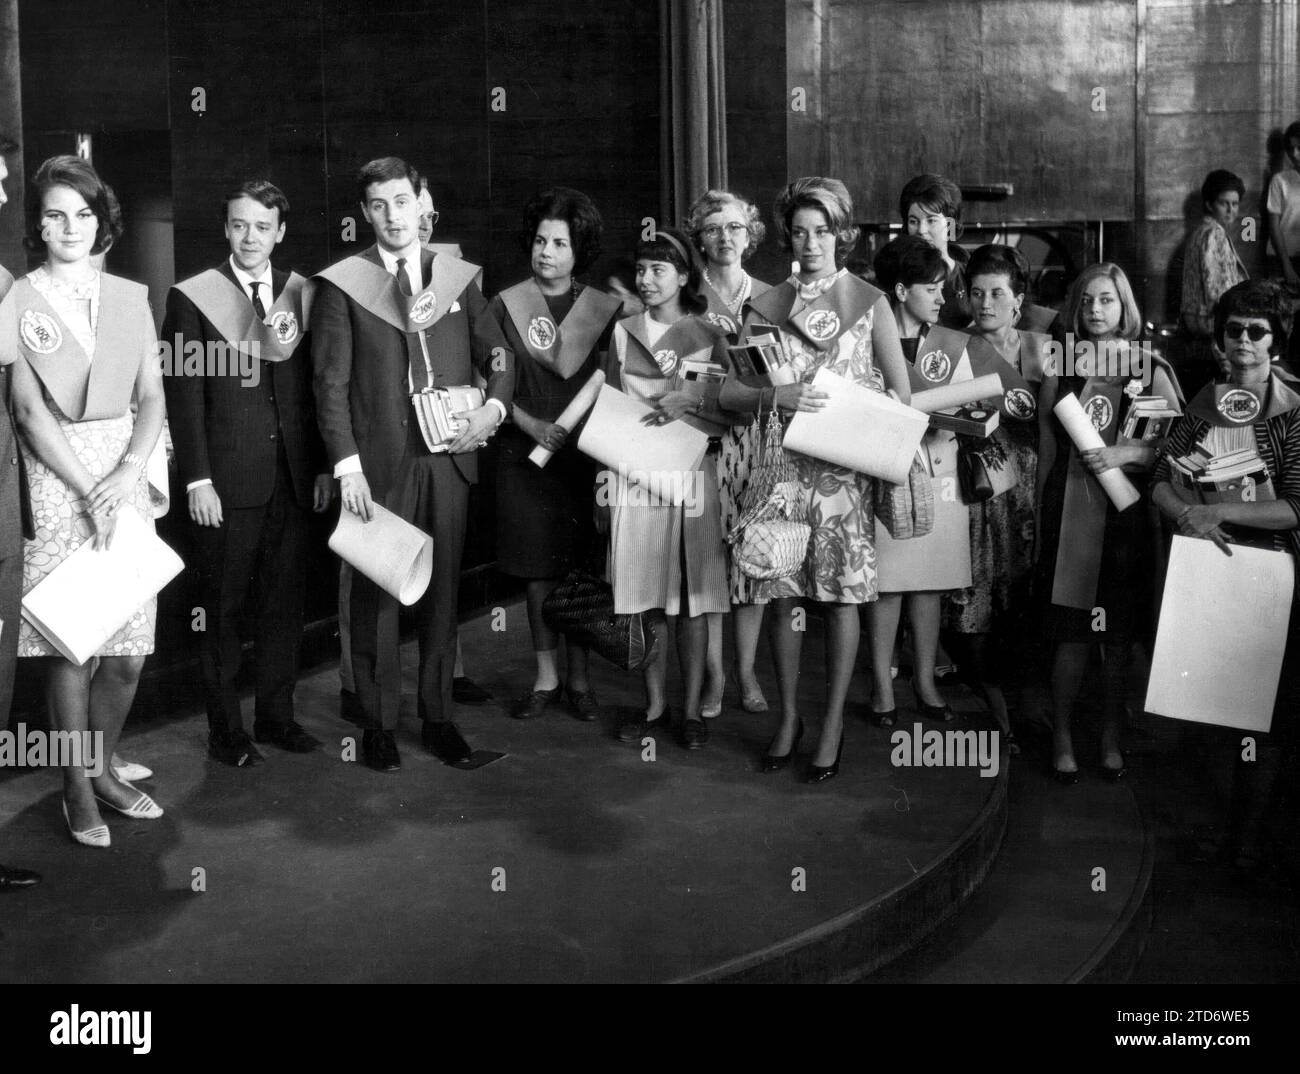 12/31/1963. Foreign Students at the closing of the Summer Courses at the Faculty of Philosophy and Letters with their Borders and Diplomas. Credit: Album / Archivo ABC / Teodoro Naranjo Domínguez Stock Photo